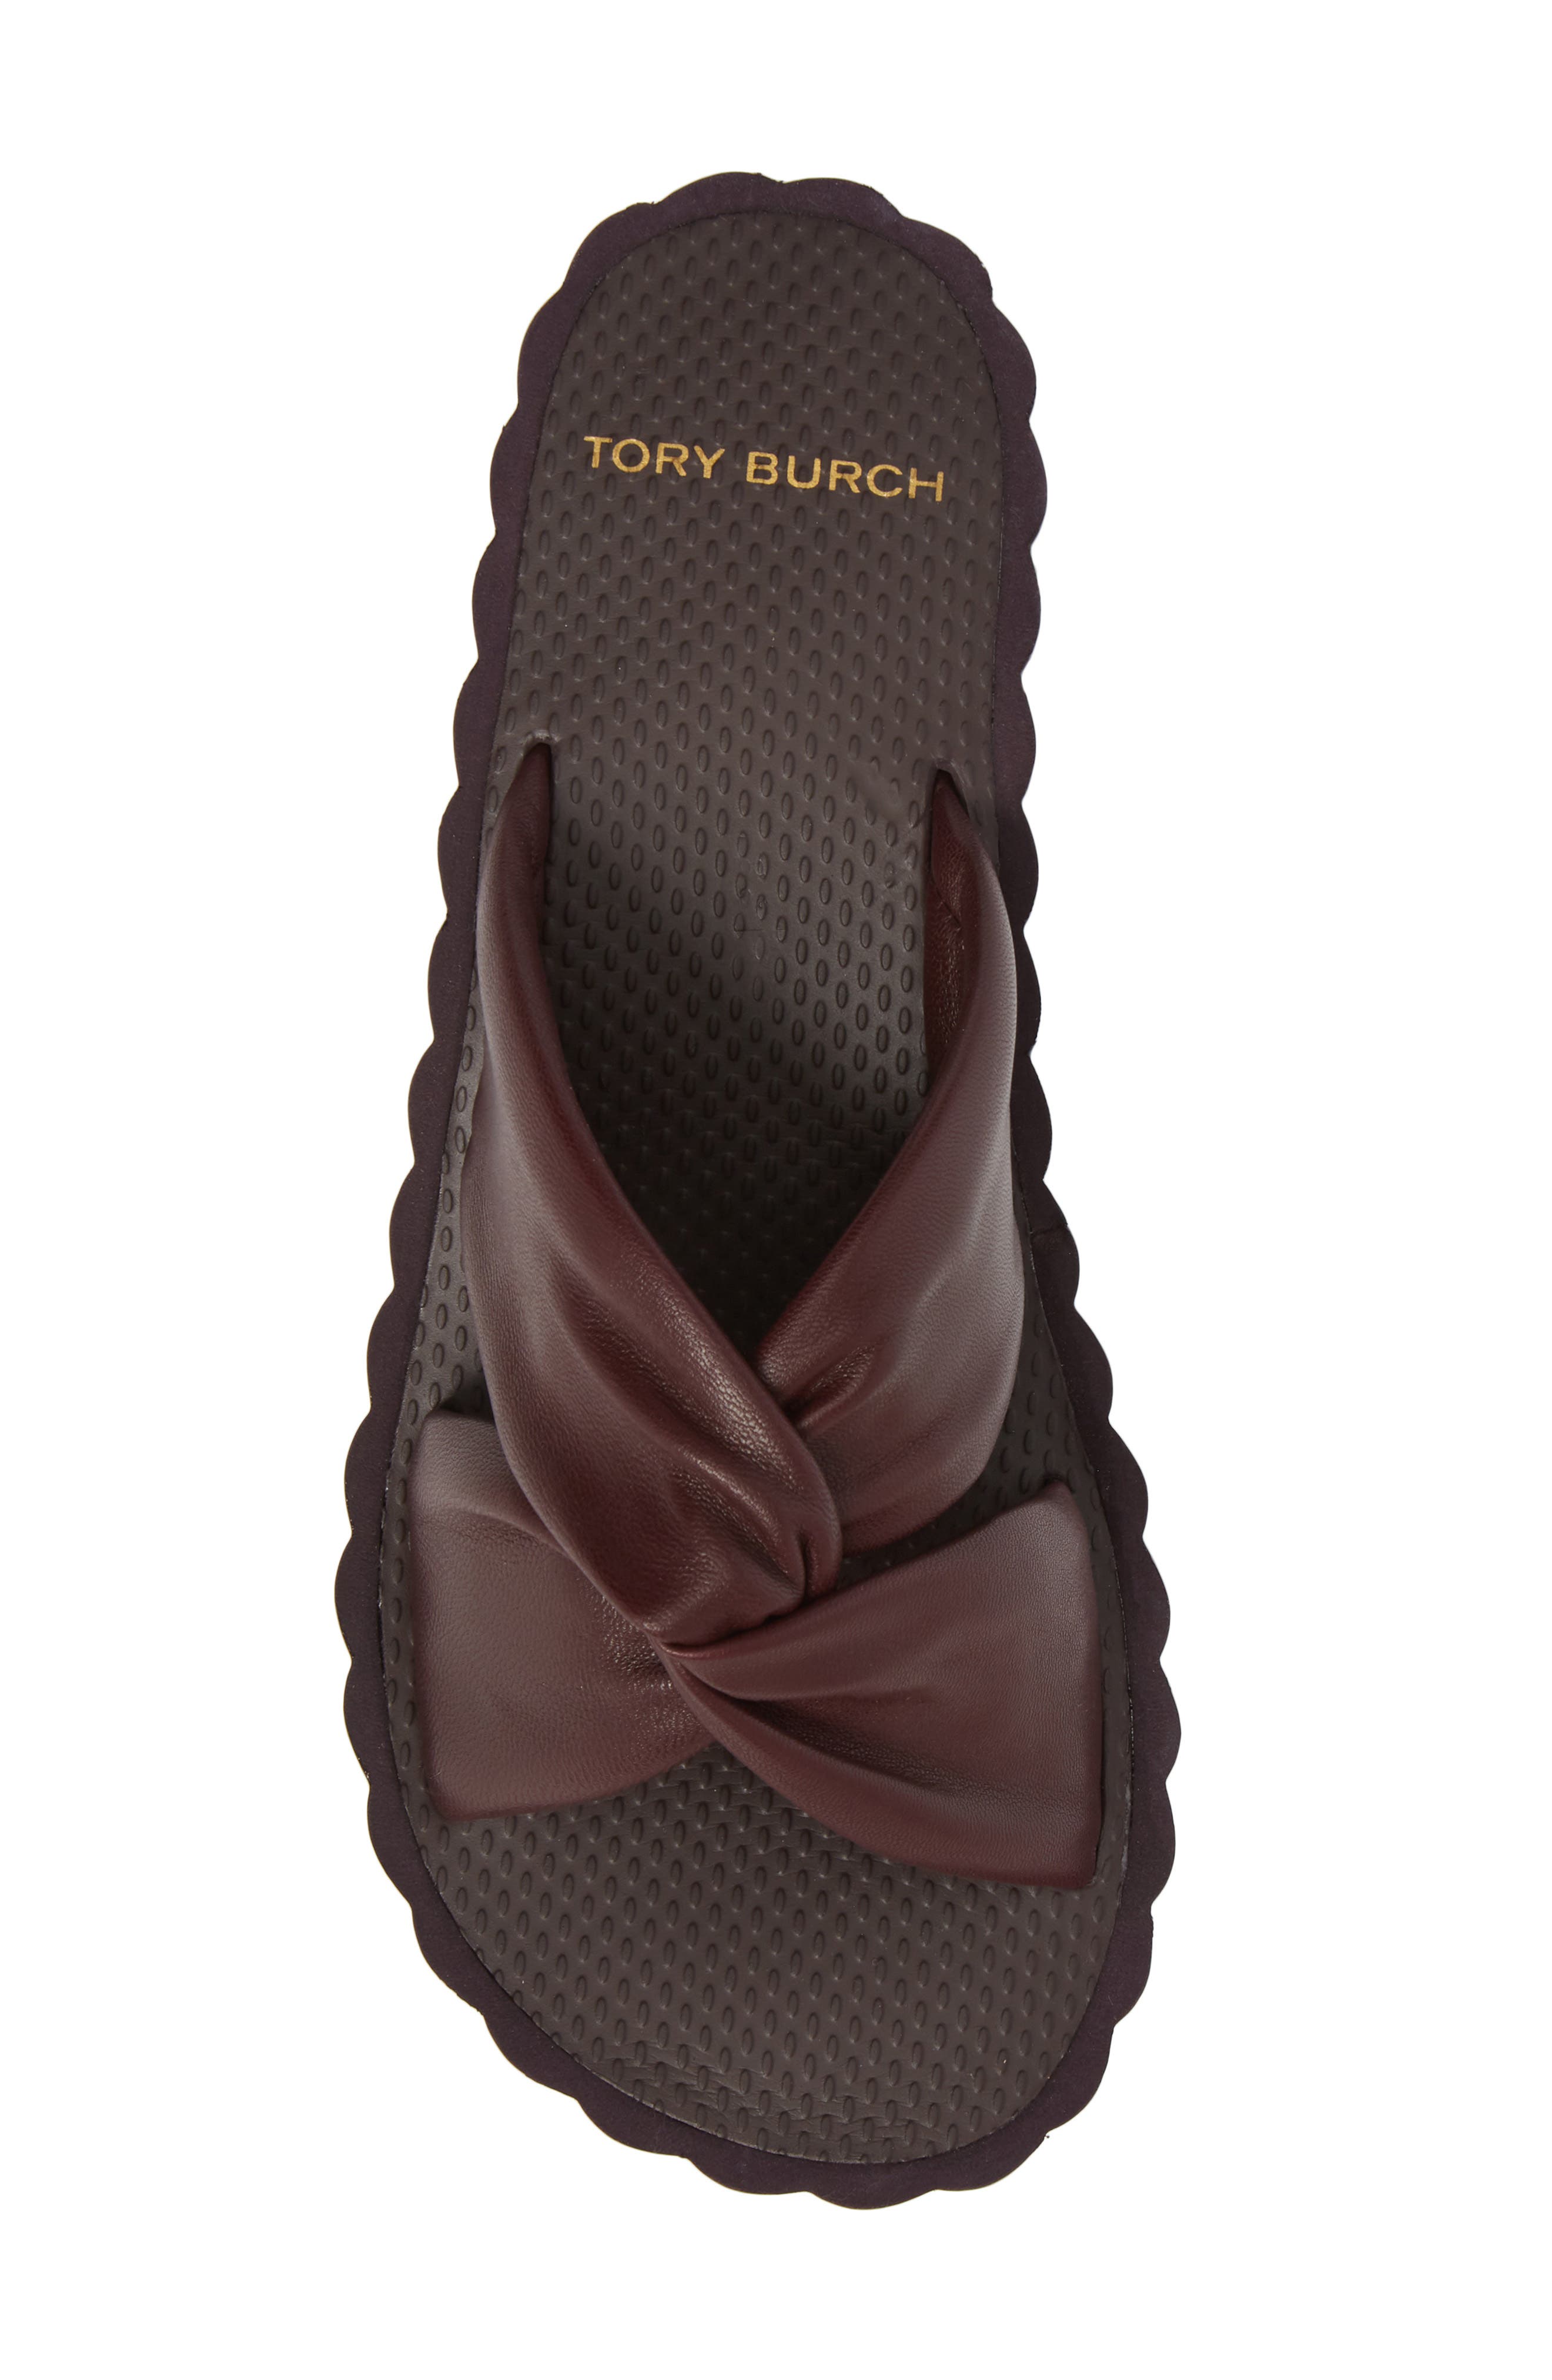 tory burch knotted scallop wedge slide